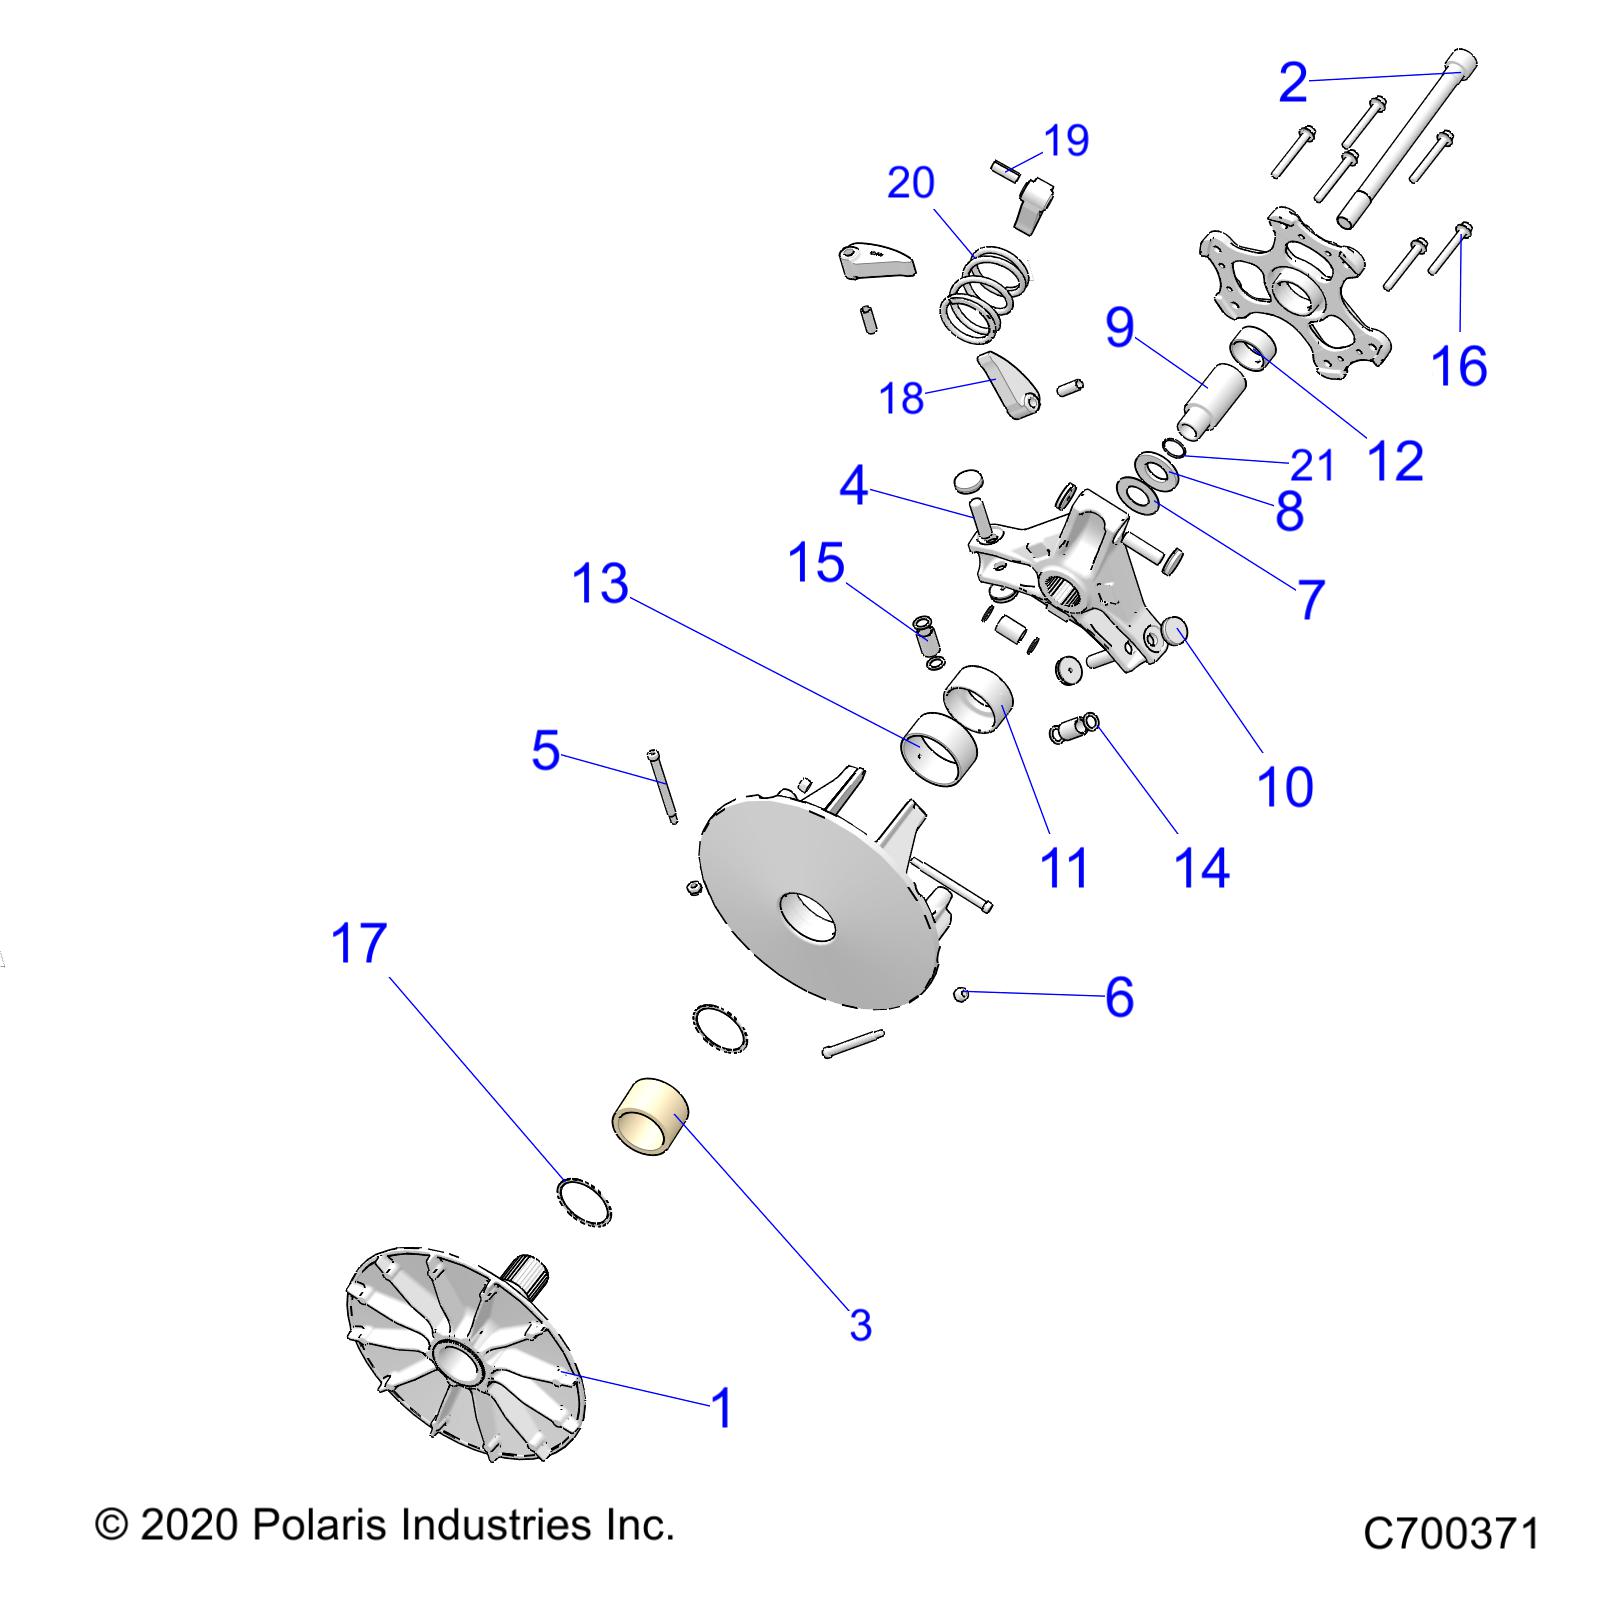 Part Number : 1323400 SPIDER ASSEMBLY  16.7 MM